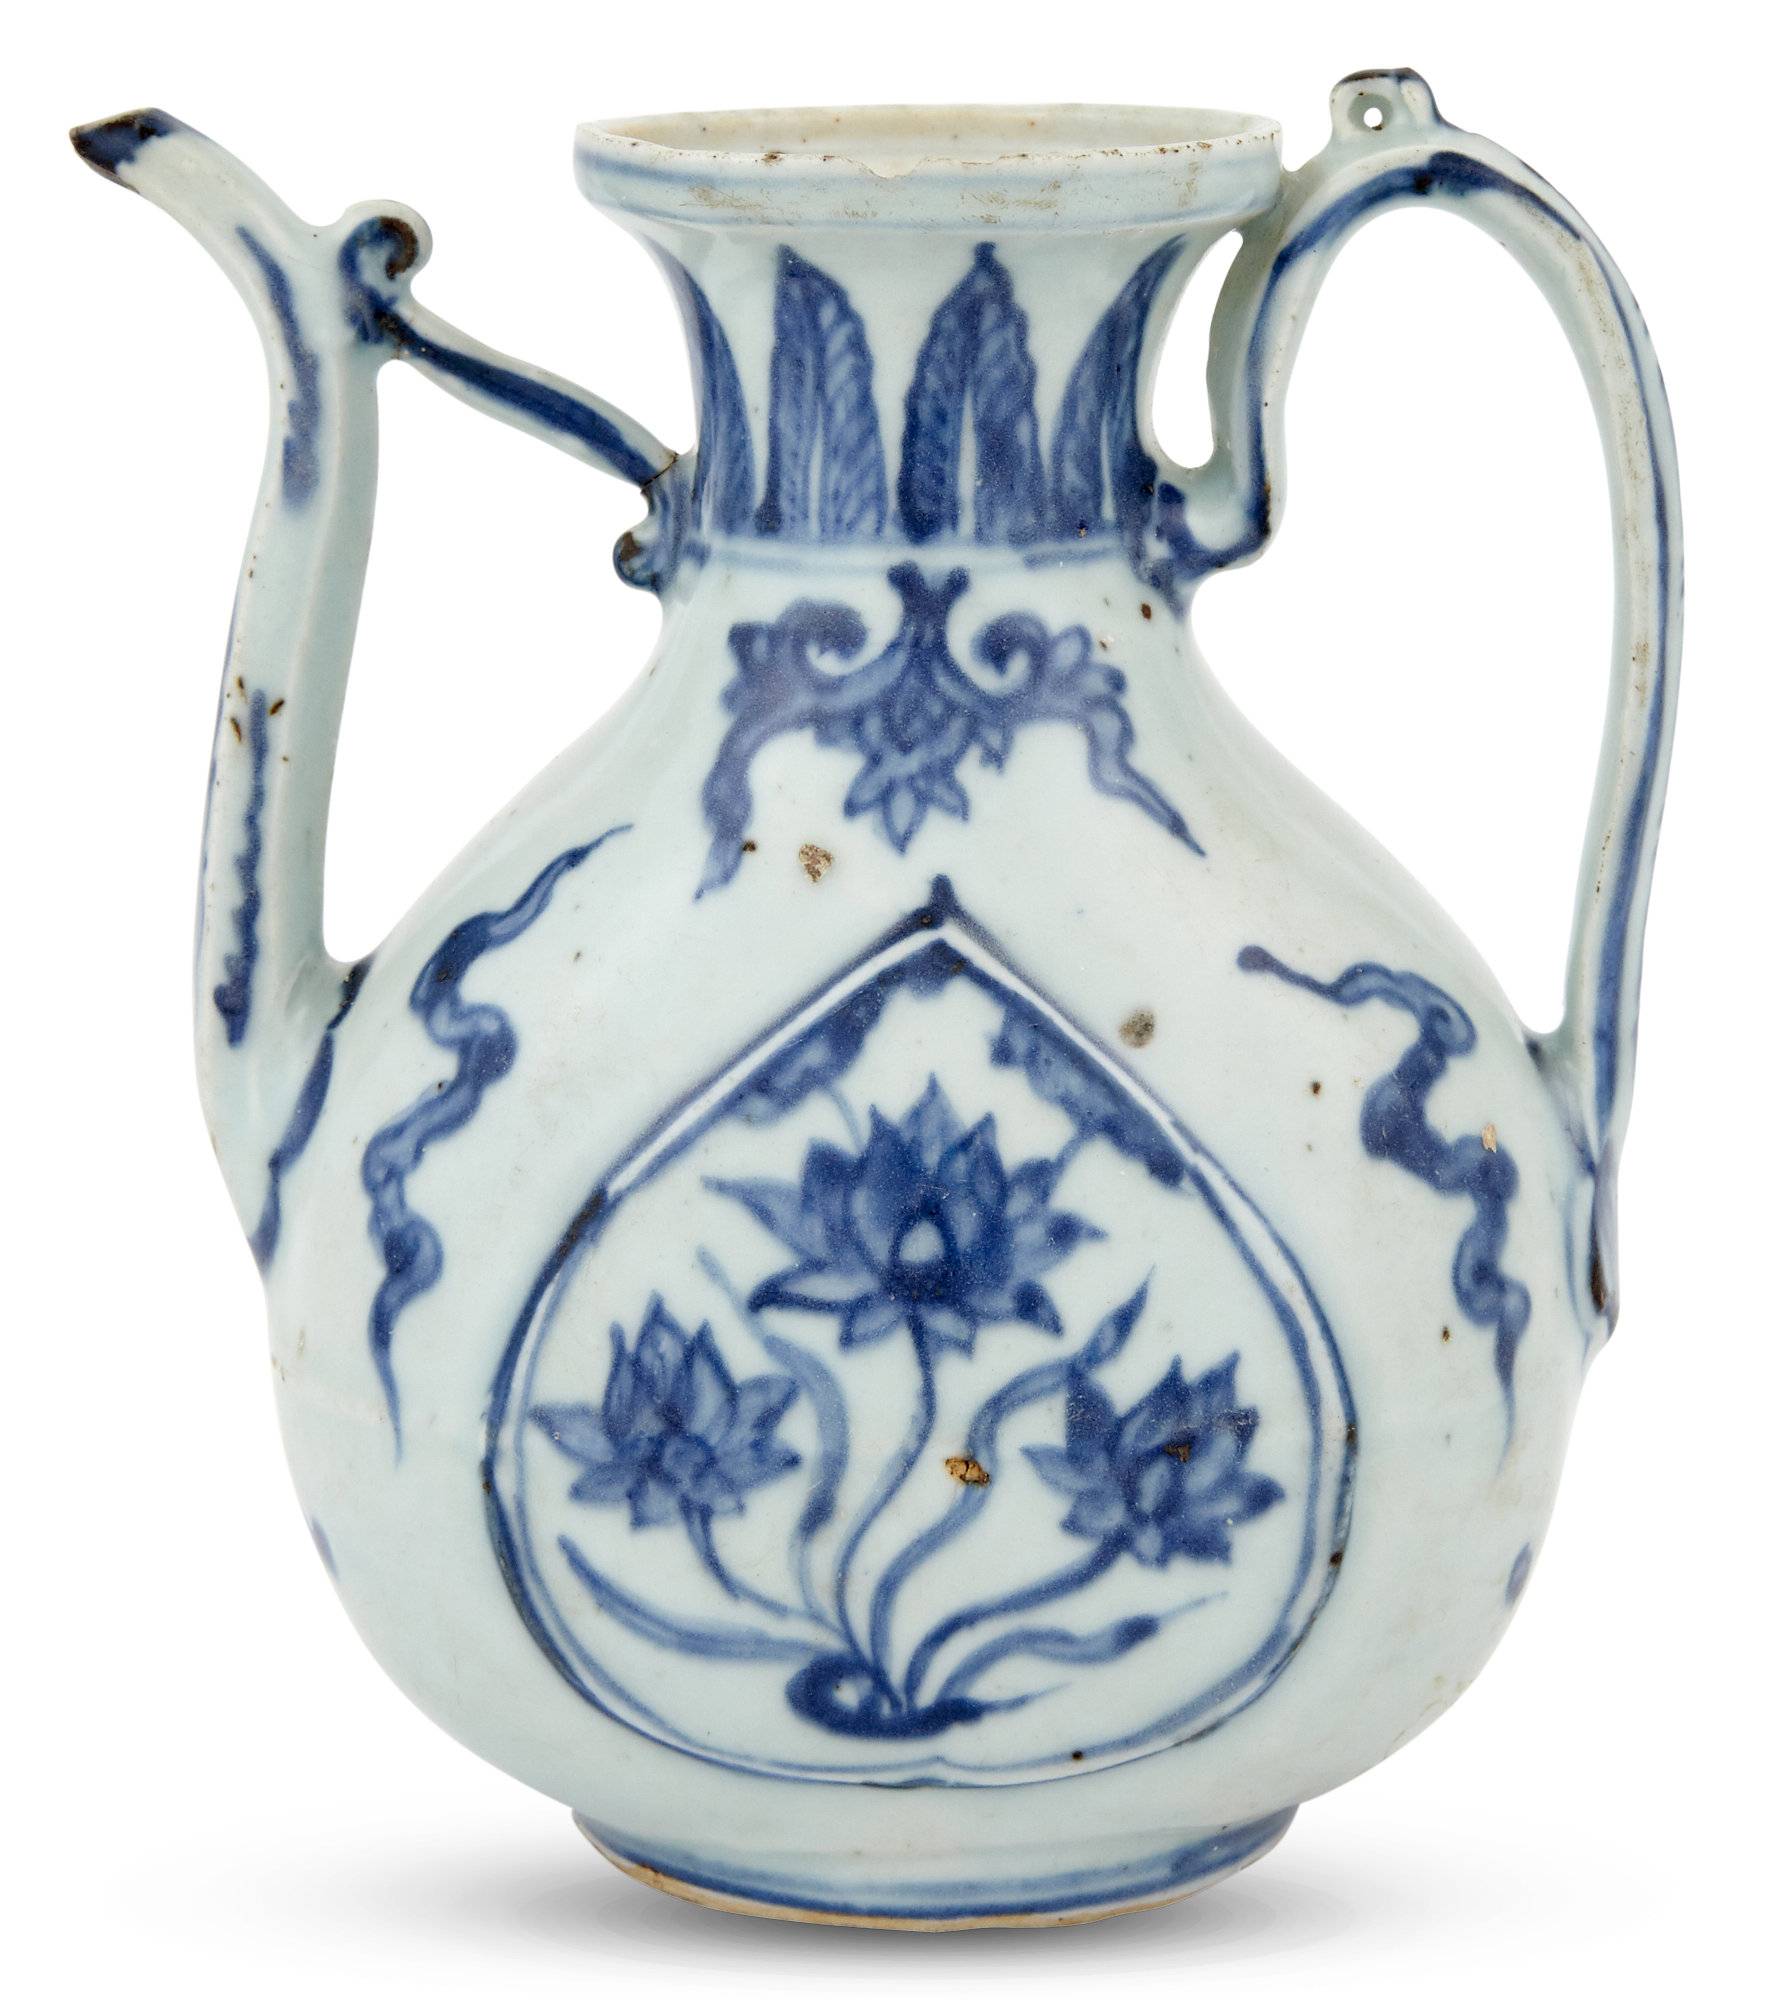 A Chinese Blue and White Porcelain Ewer, Yuan Dynasty